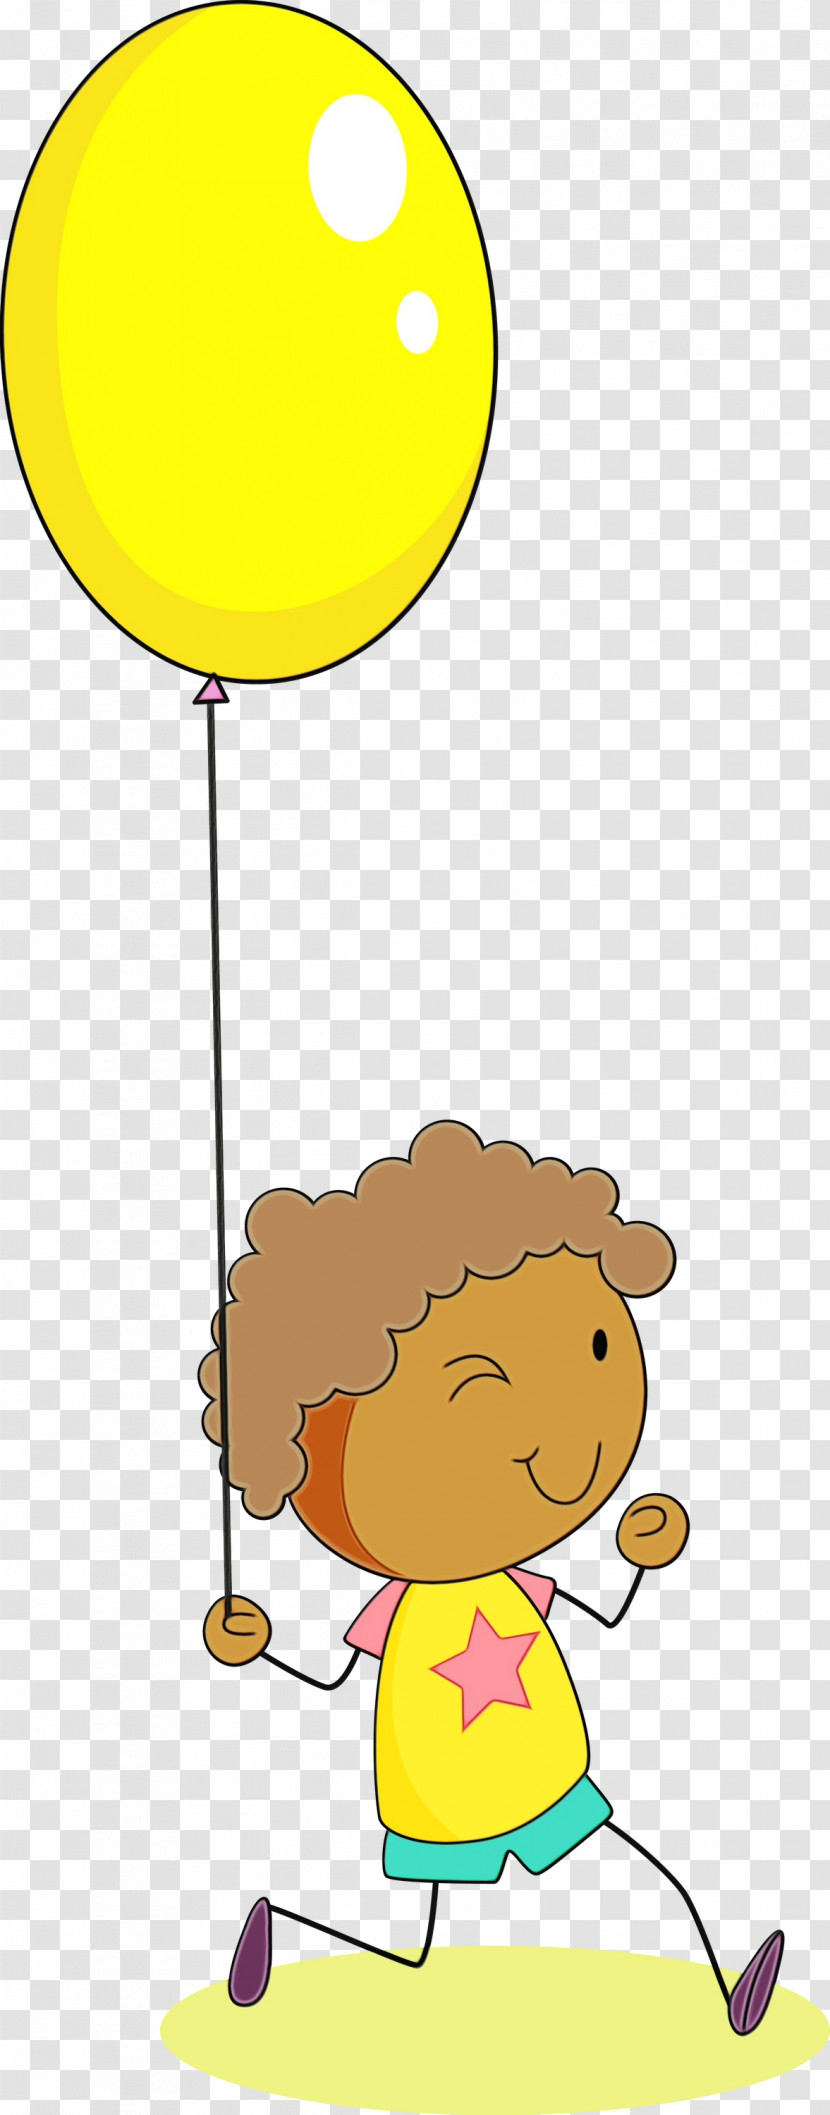 Yellow Cartoon Party Supply Balloon Happy Transparent PNG